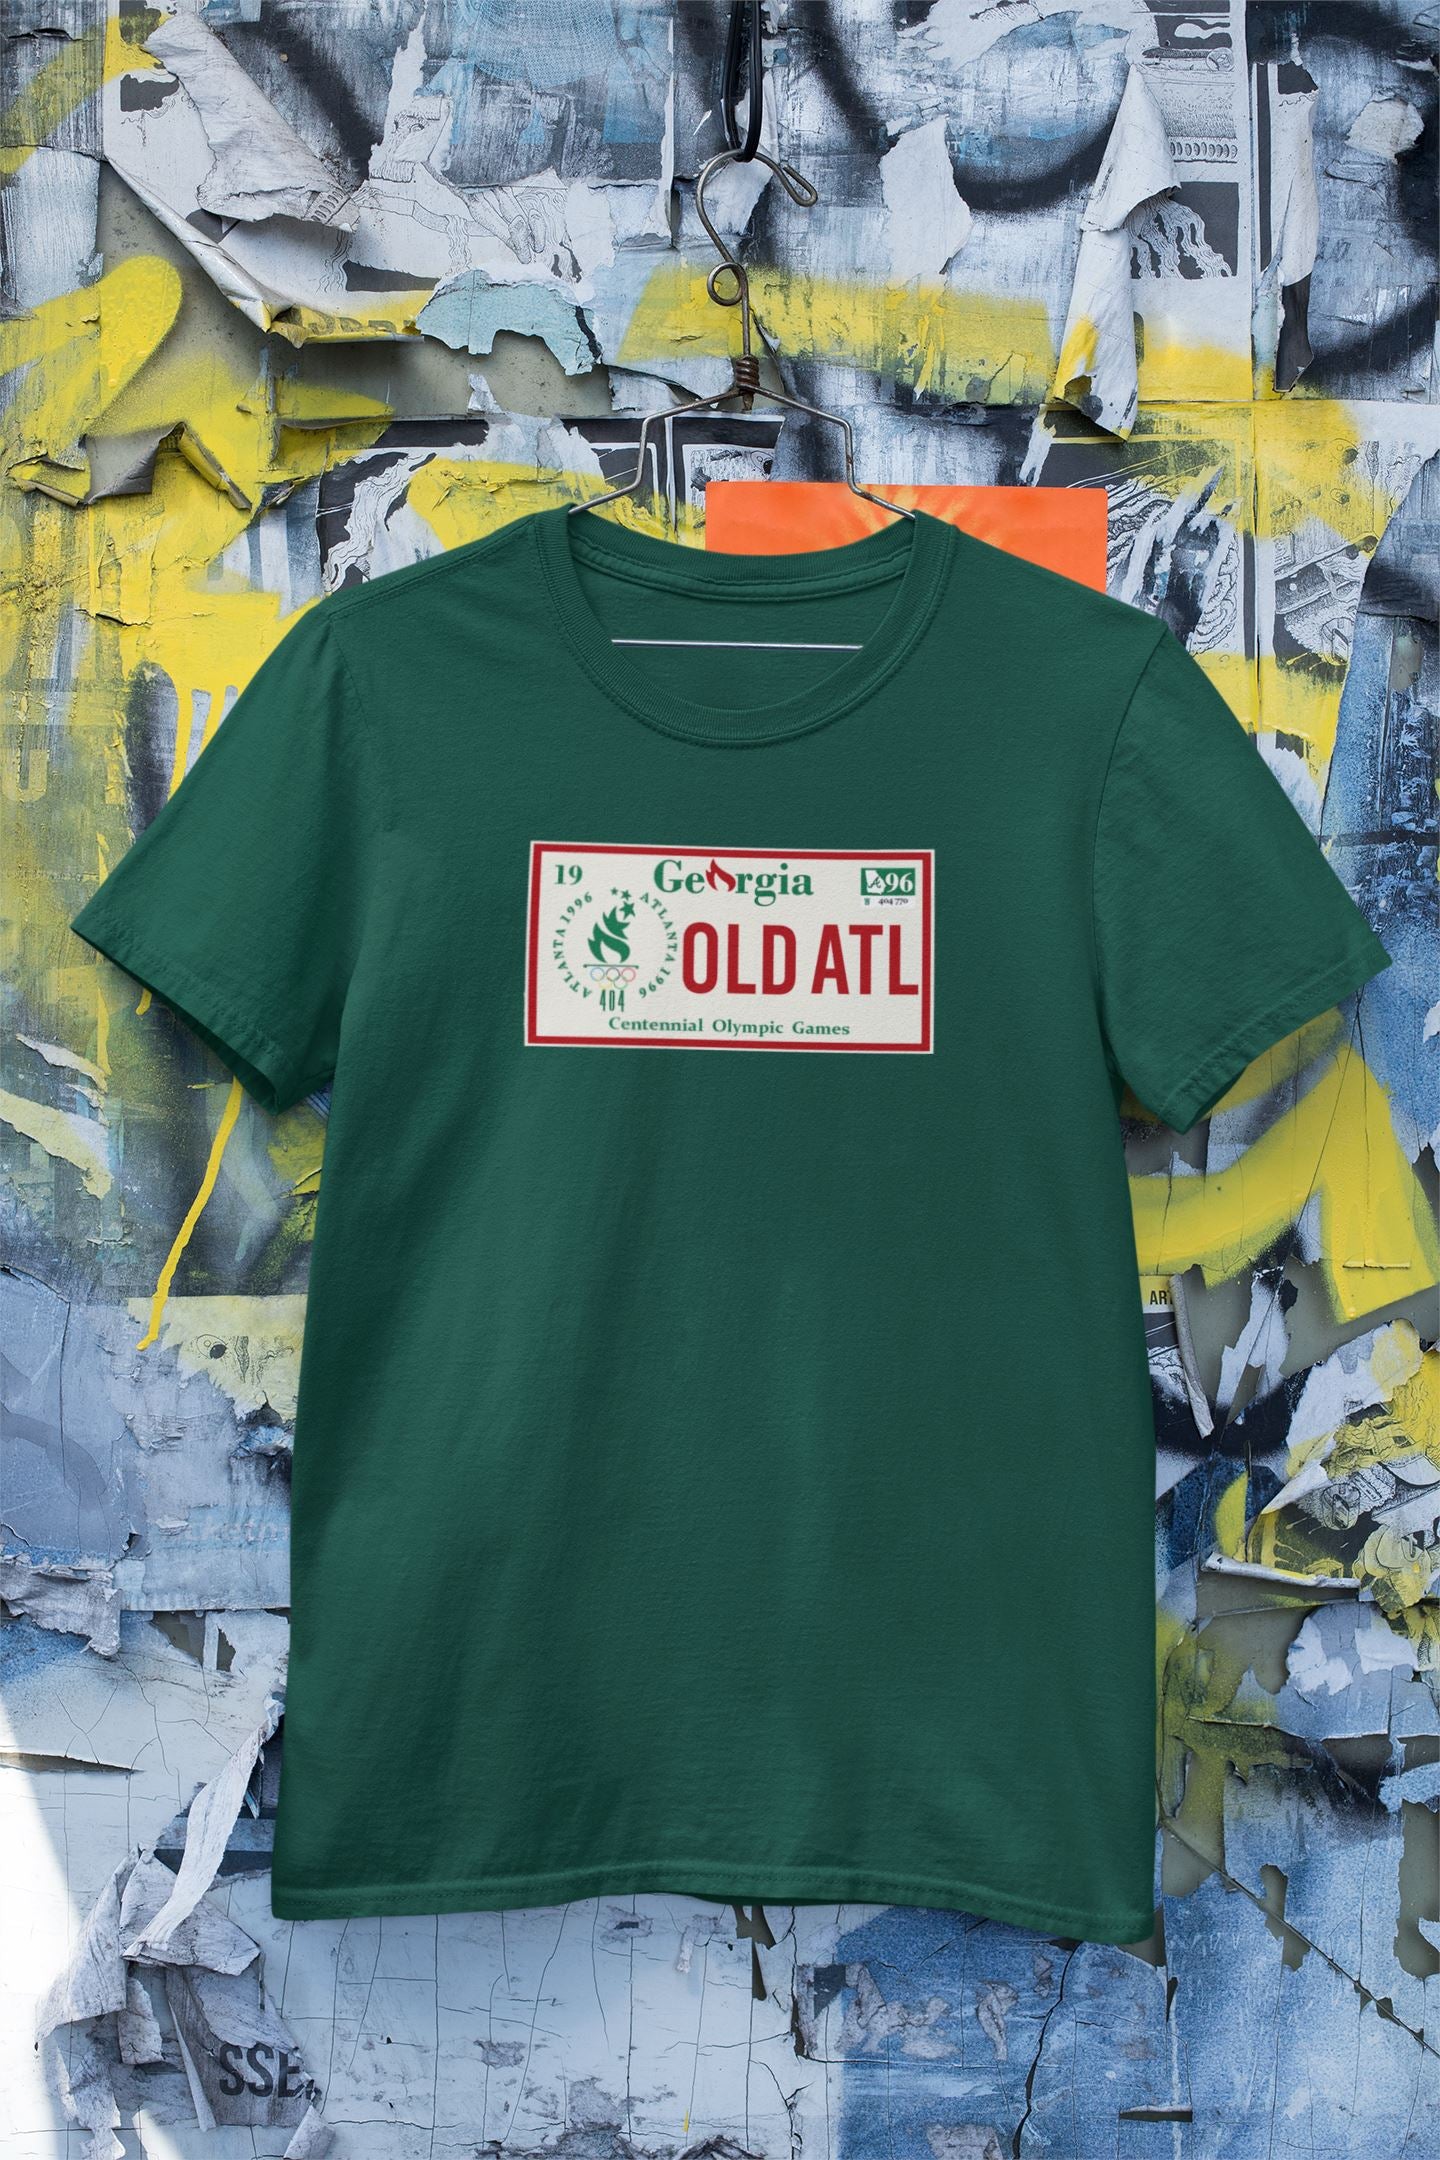 1996 OLD ATL Olympic License Plate T-Shirt Apparel & Accessories B1ack By Design LLC 